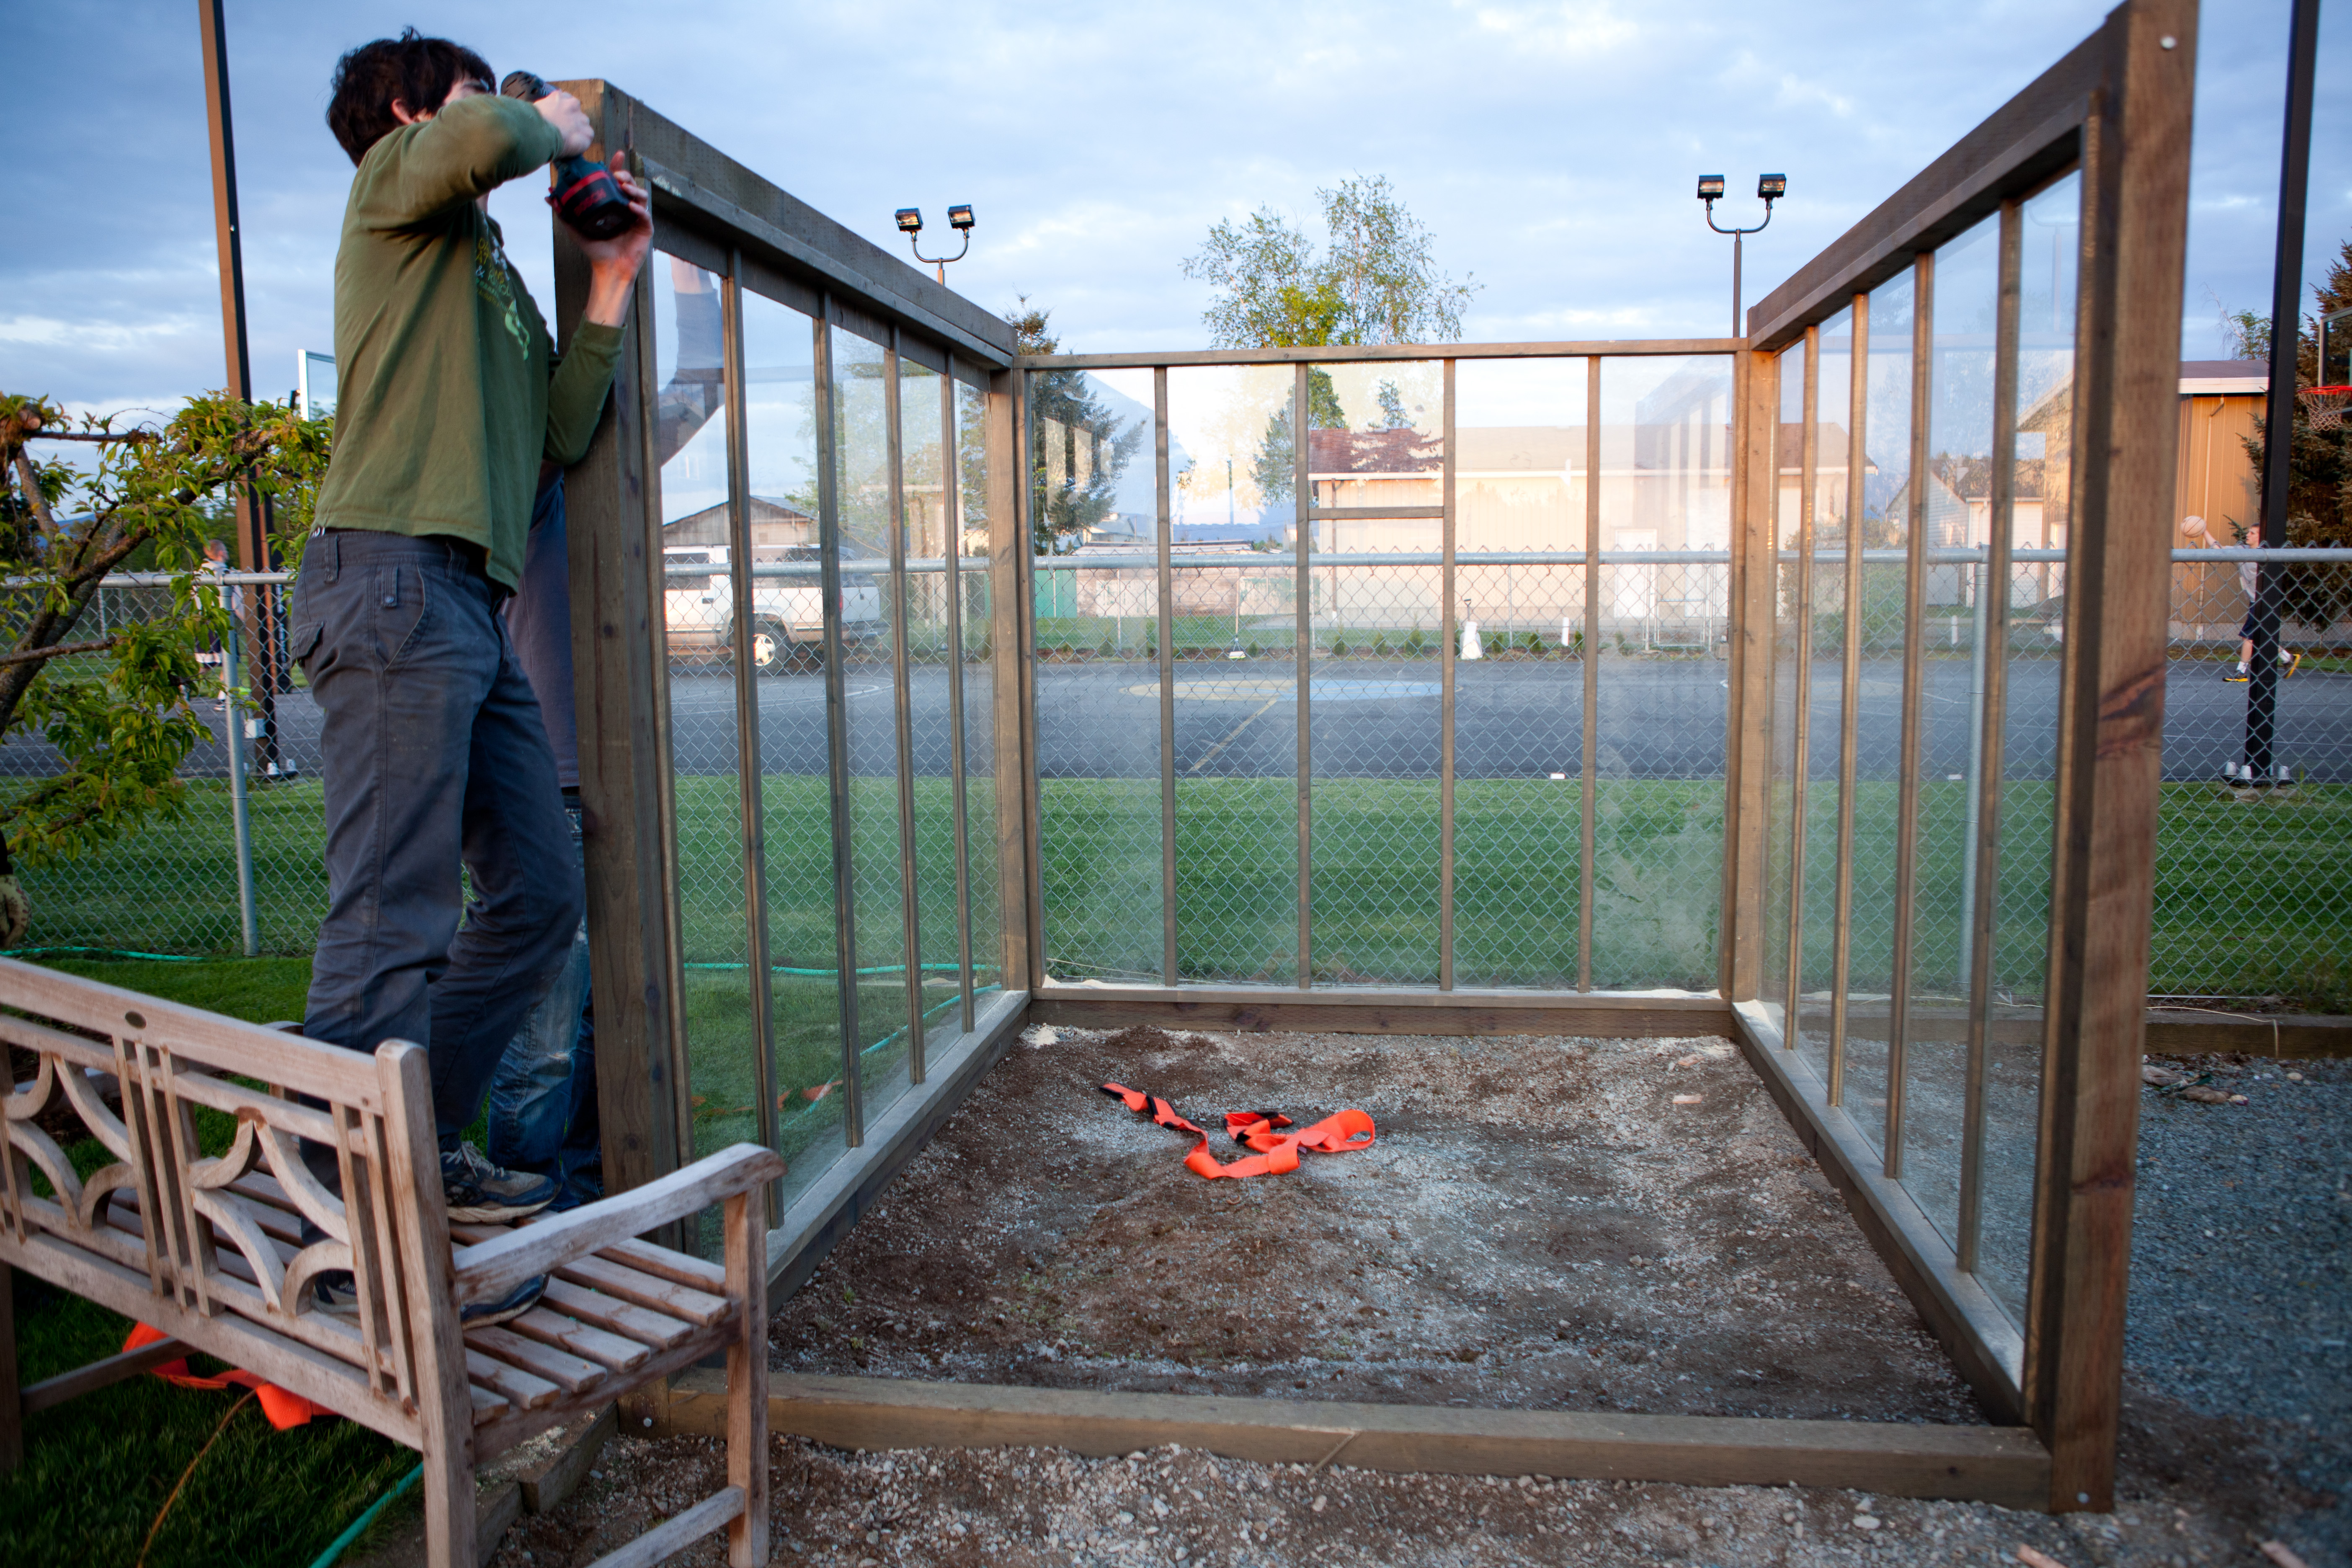 Building A Greenhouse The Secret Life Of Daydreams